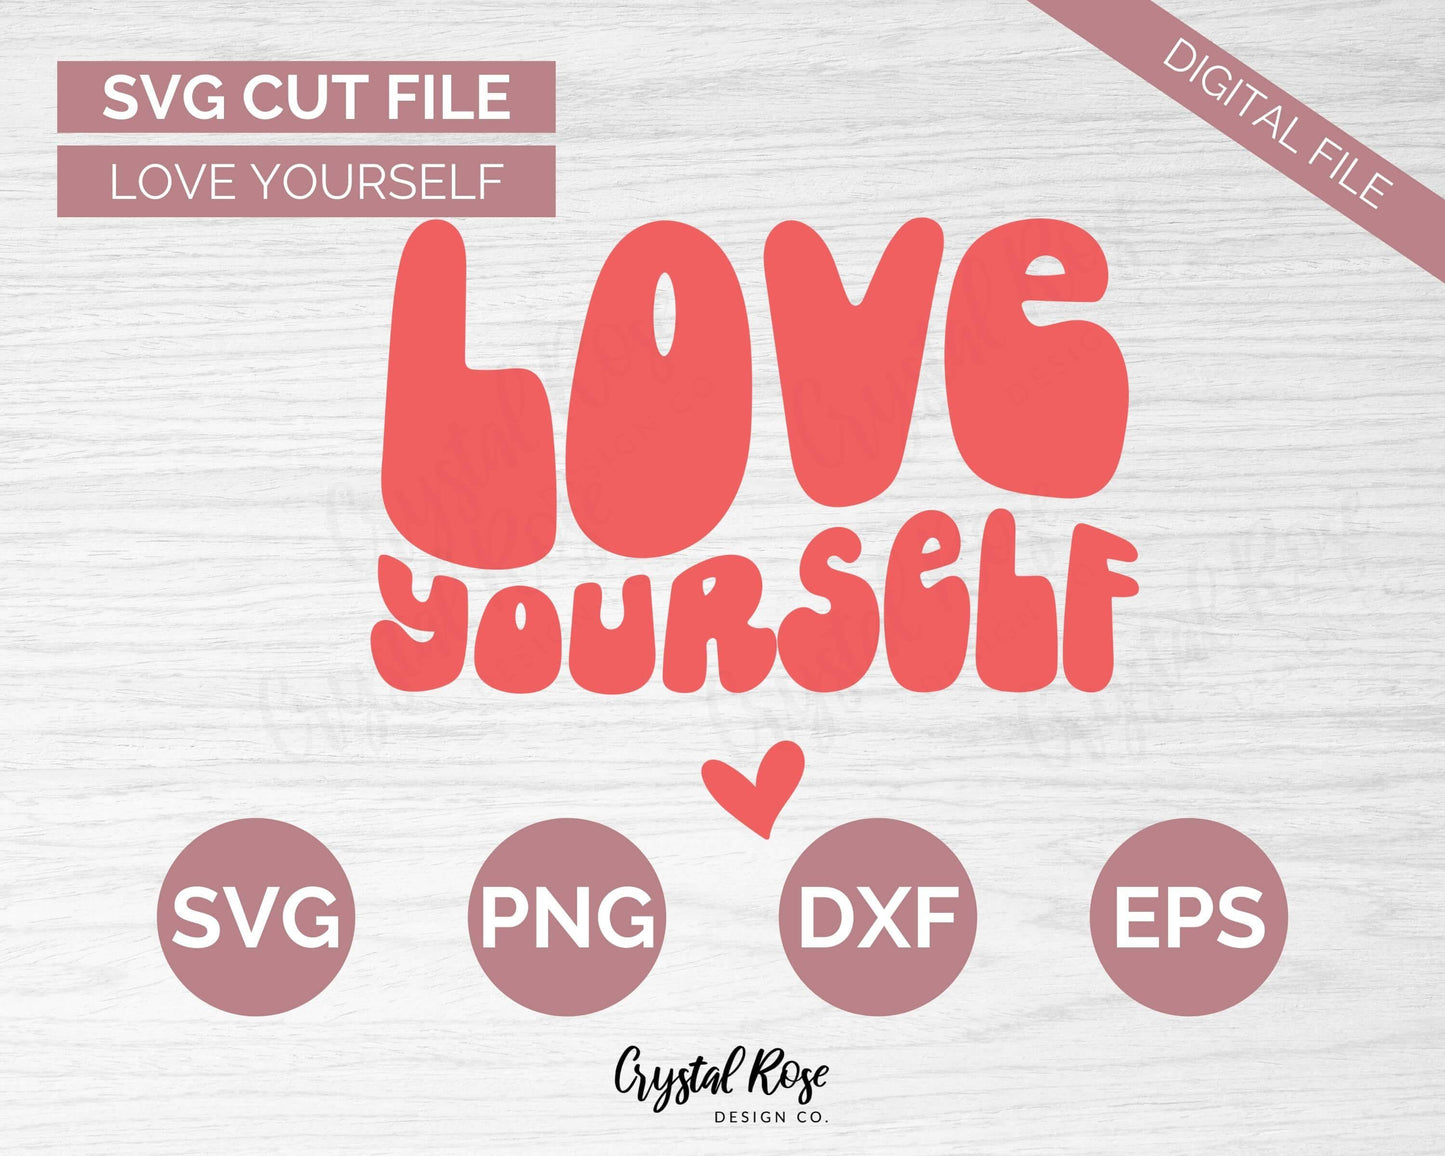 Retro Love Yourself SVG, Inspirational SVG, Digital Download, Cricut, Silhouette, Glowforge (includes svg/png/dxf/eps)